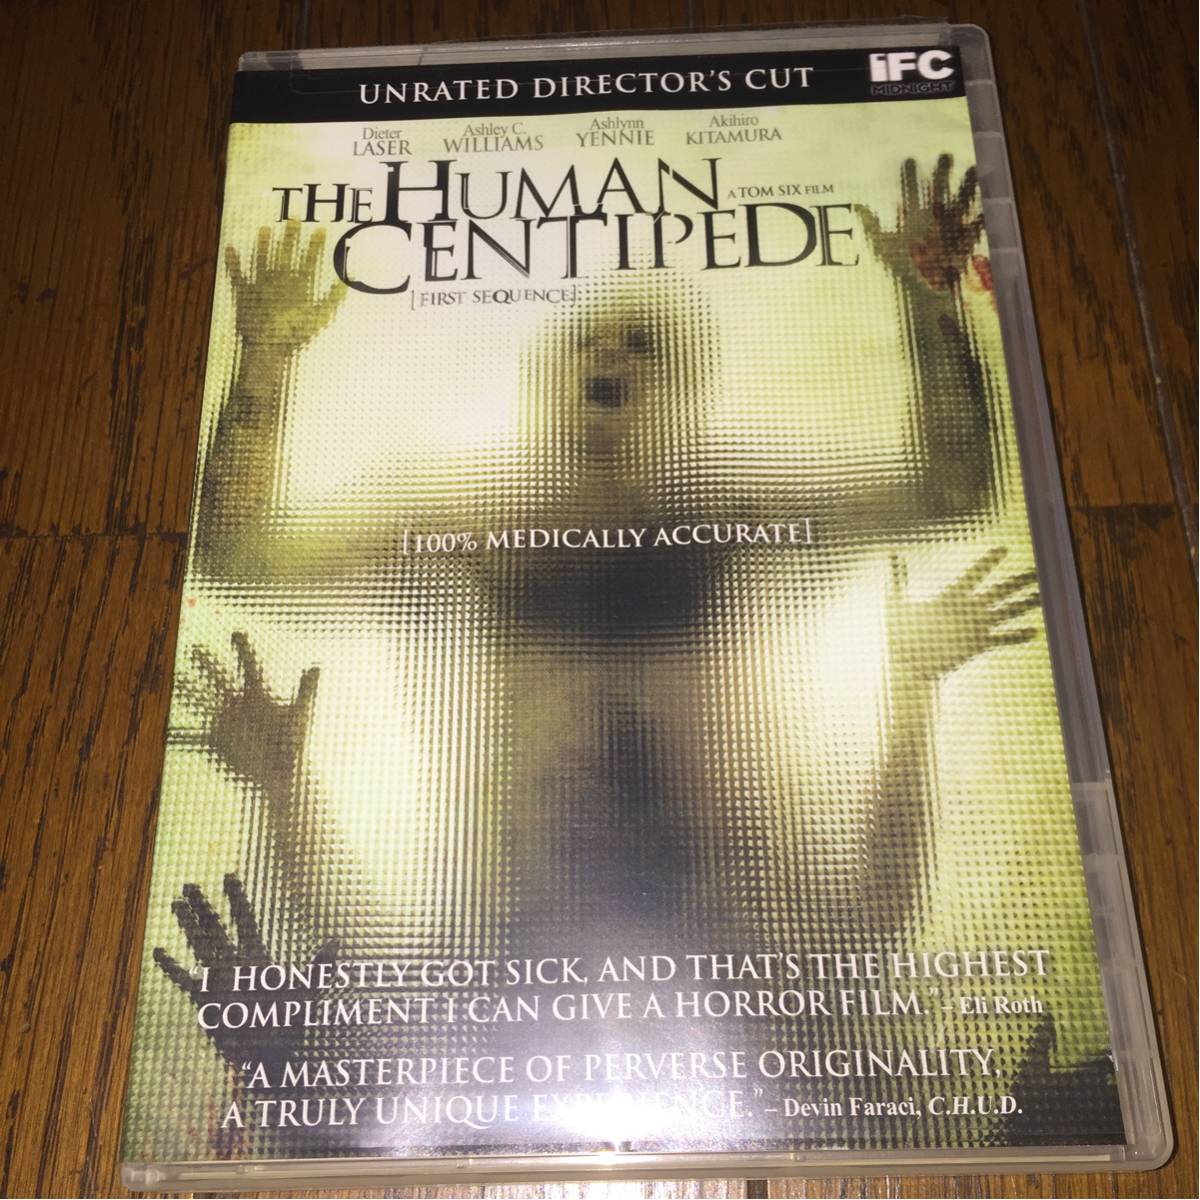 UNRATED DIRECTOR’S CUT THE HUMAN CENTIPEDE 新品 アメリカで購入 オカルト トカゲ男? 多分英語オンリー_画像1